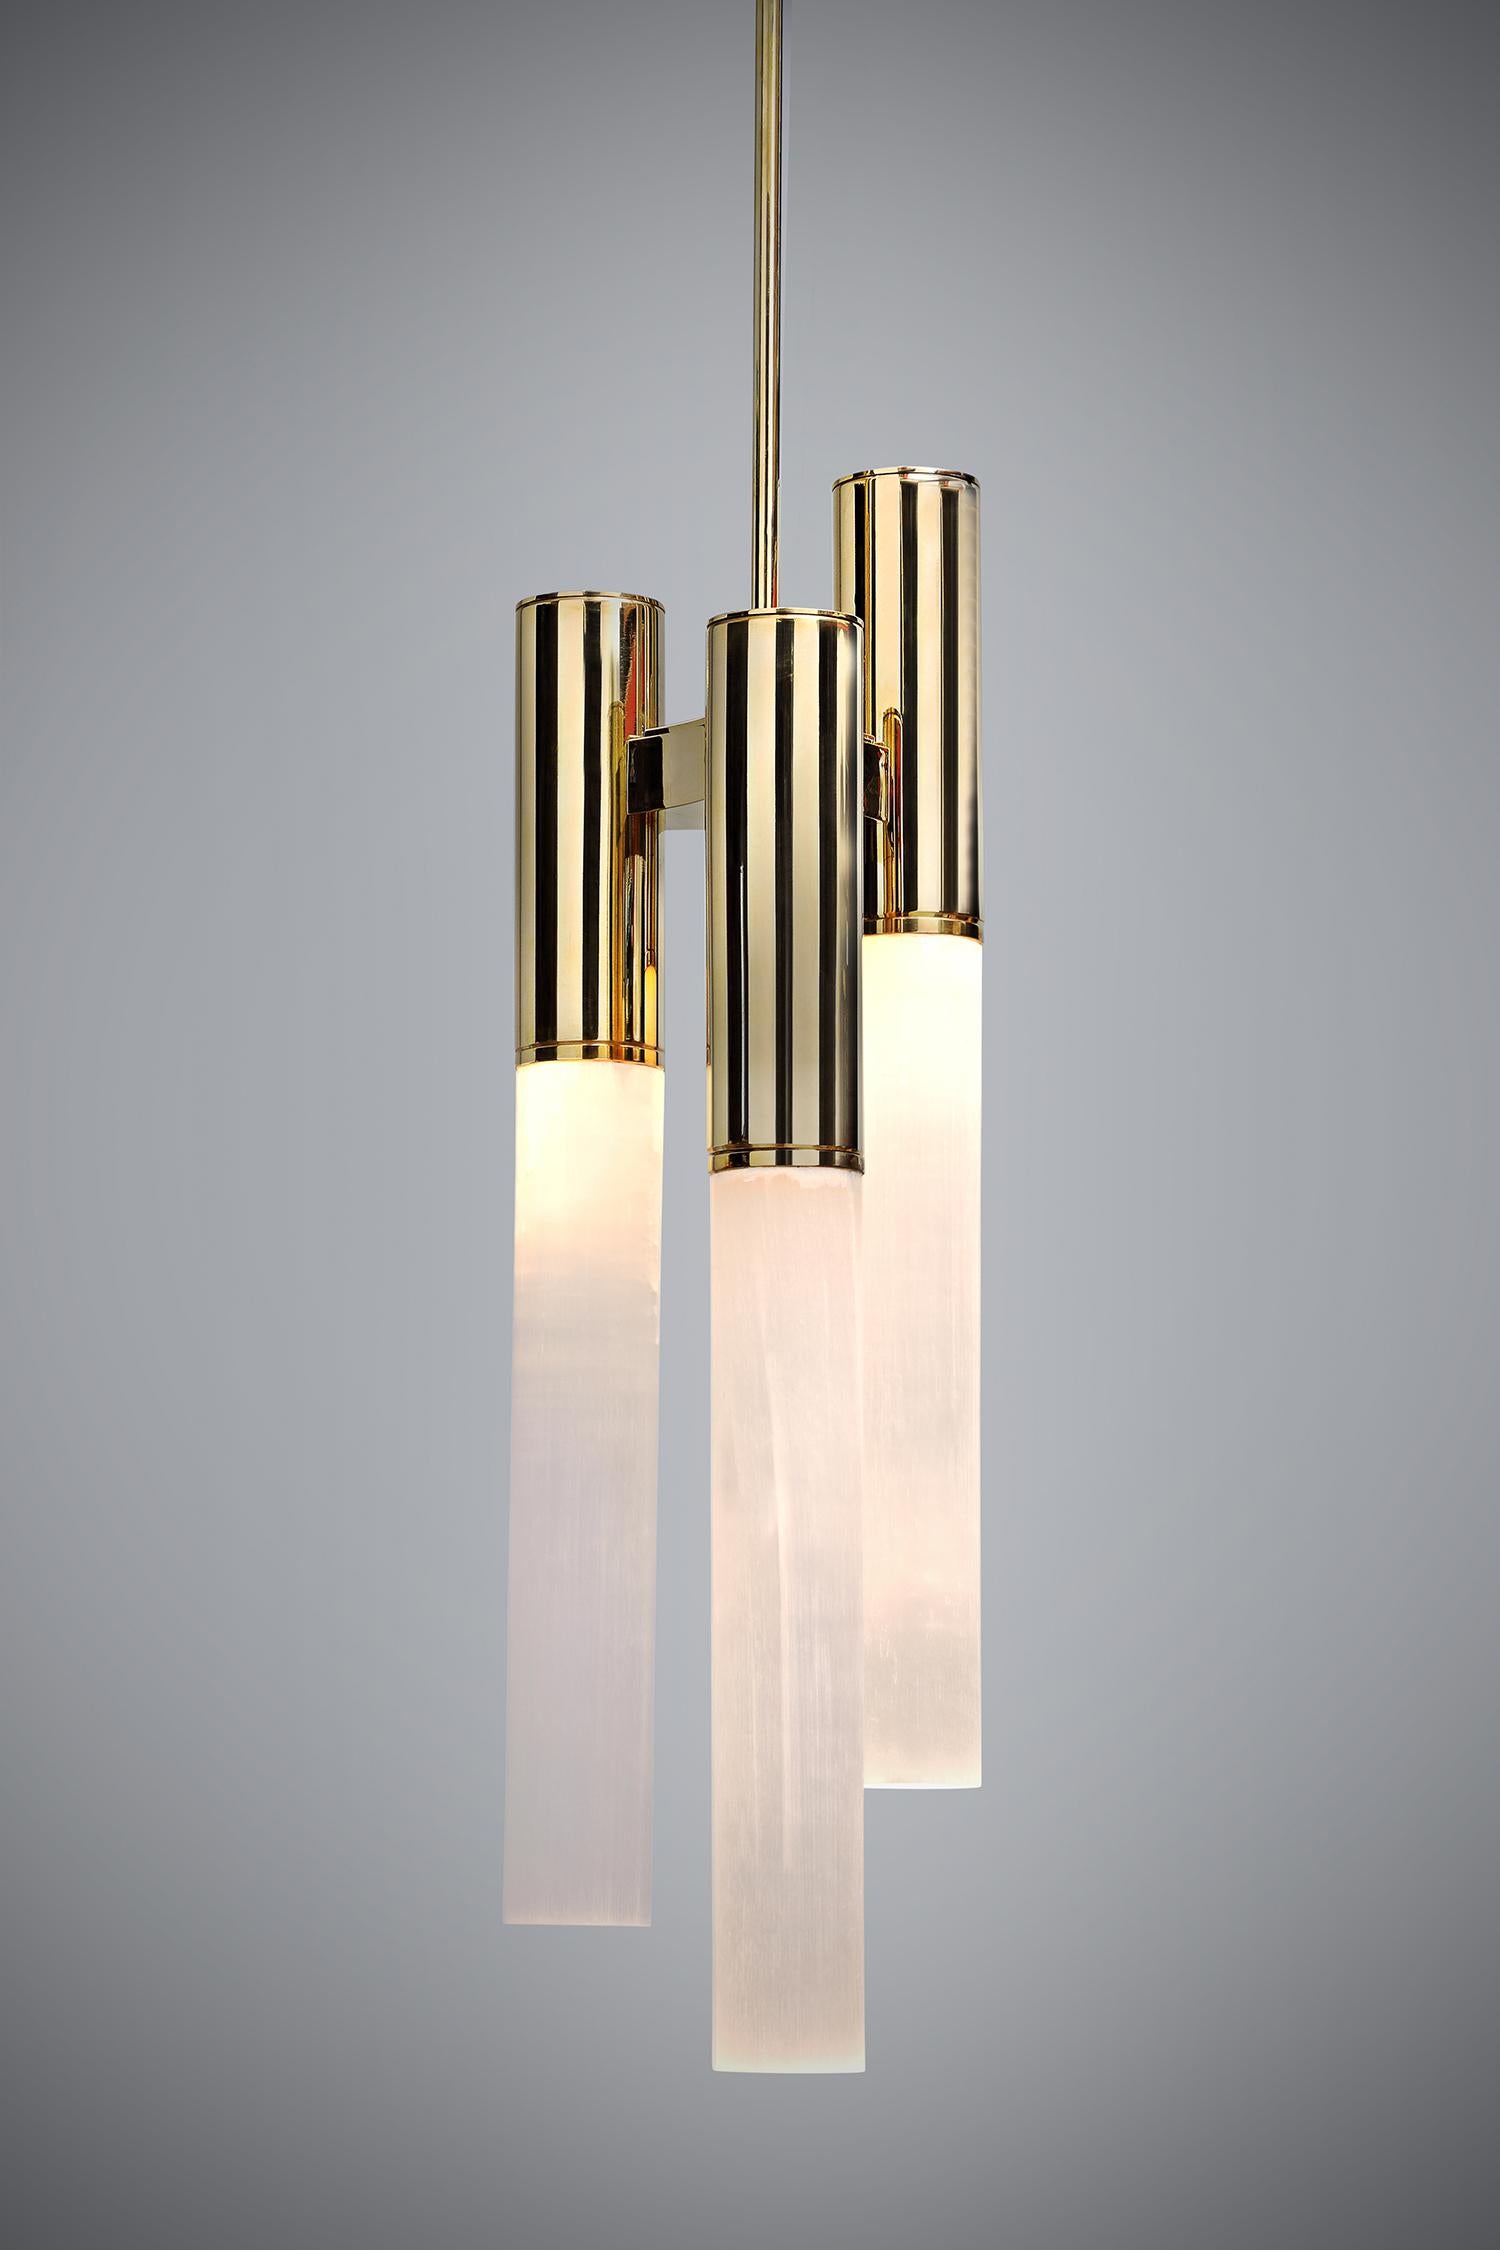 A beautiful feature for any room, our Sceptre Pendant is hand finished in polished brass and three large carefully polished rock crystal rods. Each rod is lit from the top giving an ethereal softness. Looks fabulous above a console or bedside or